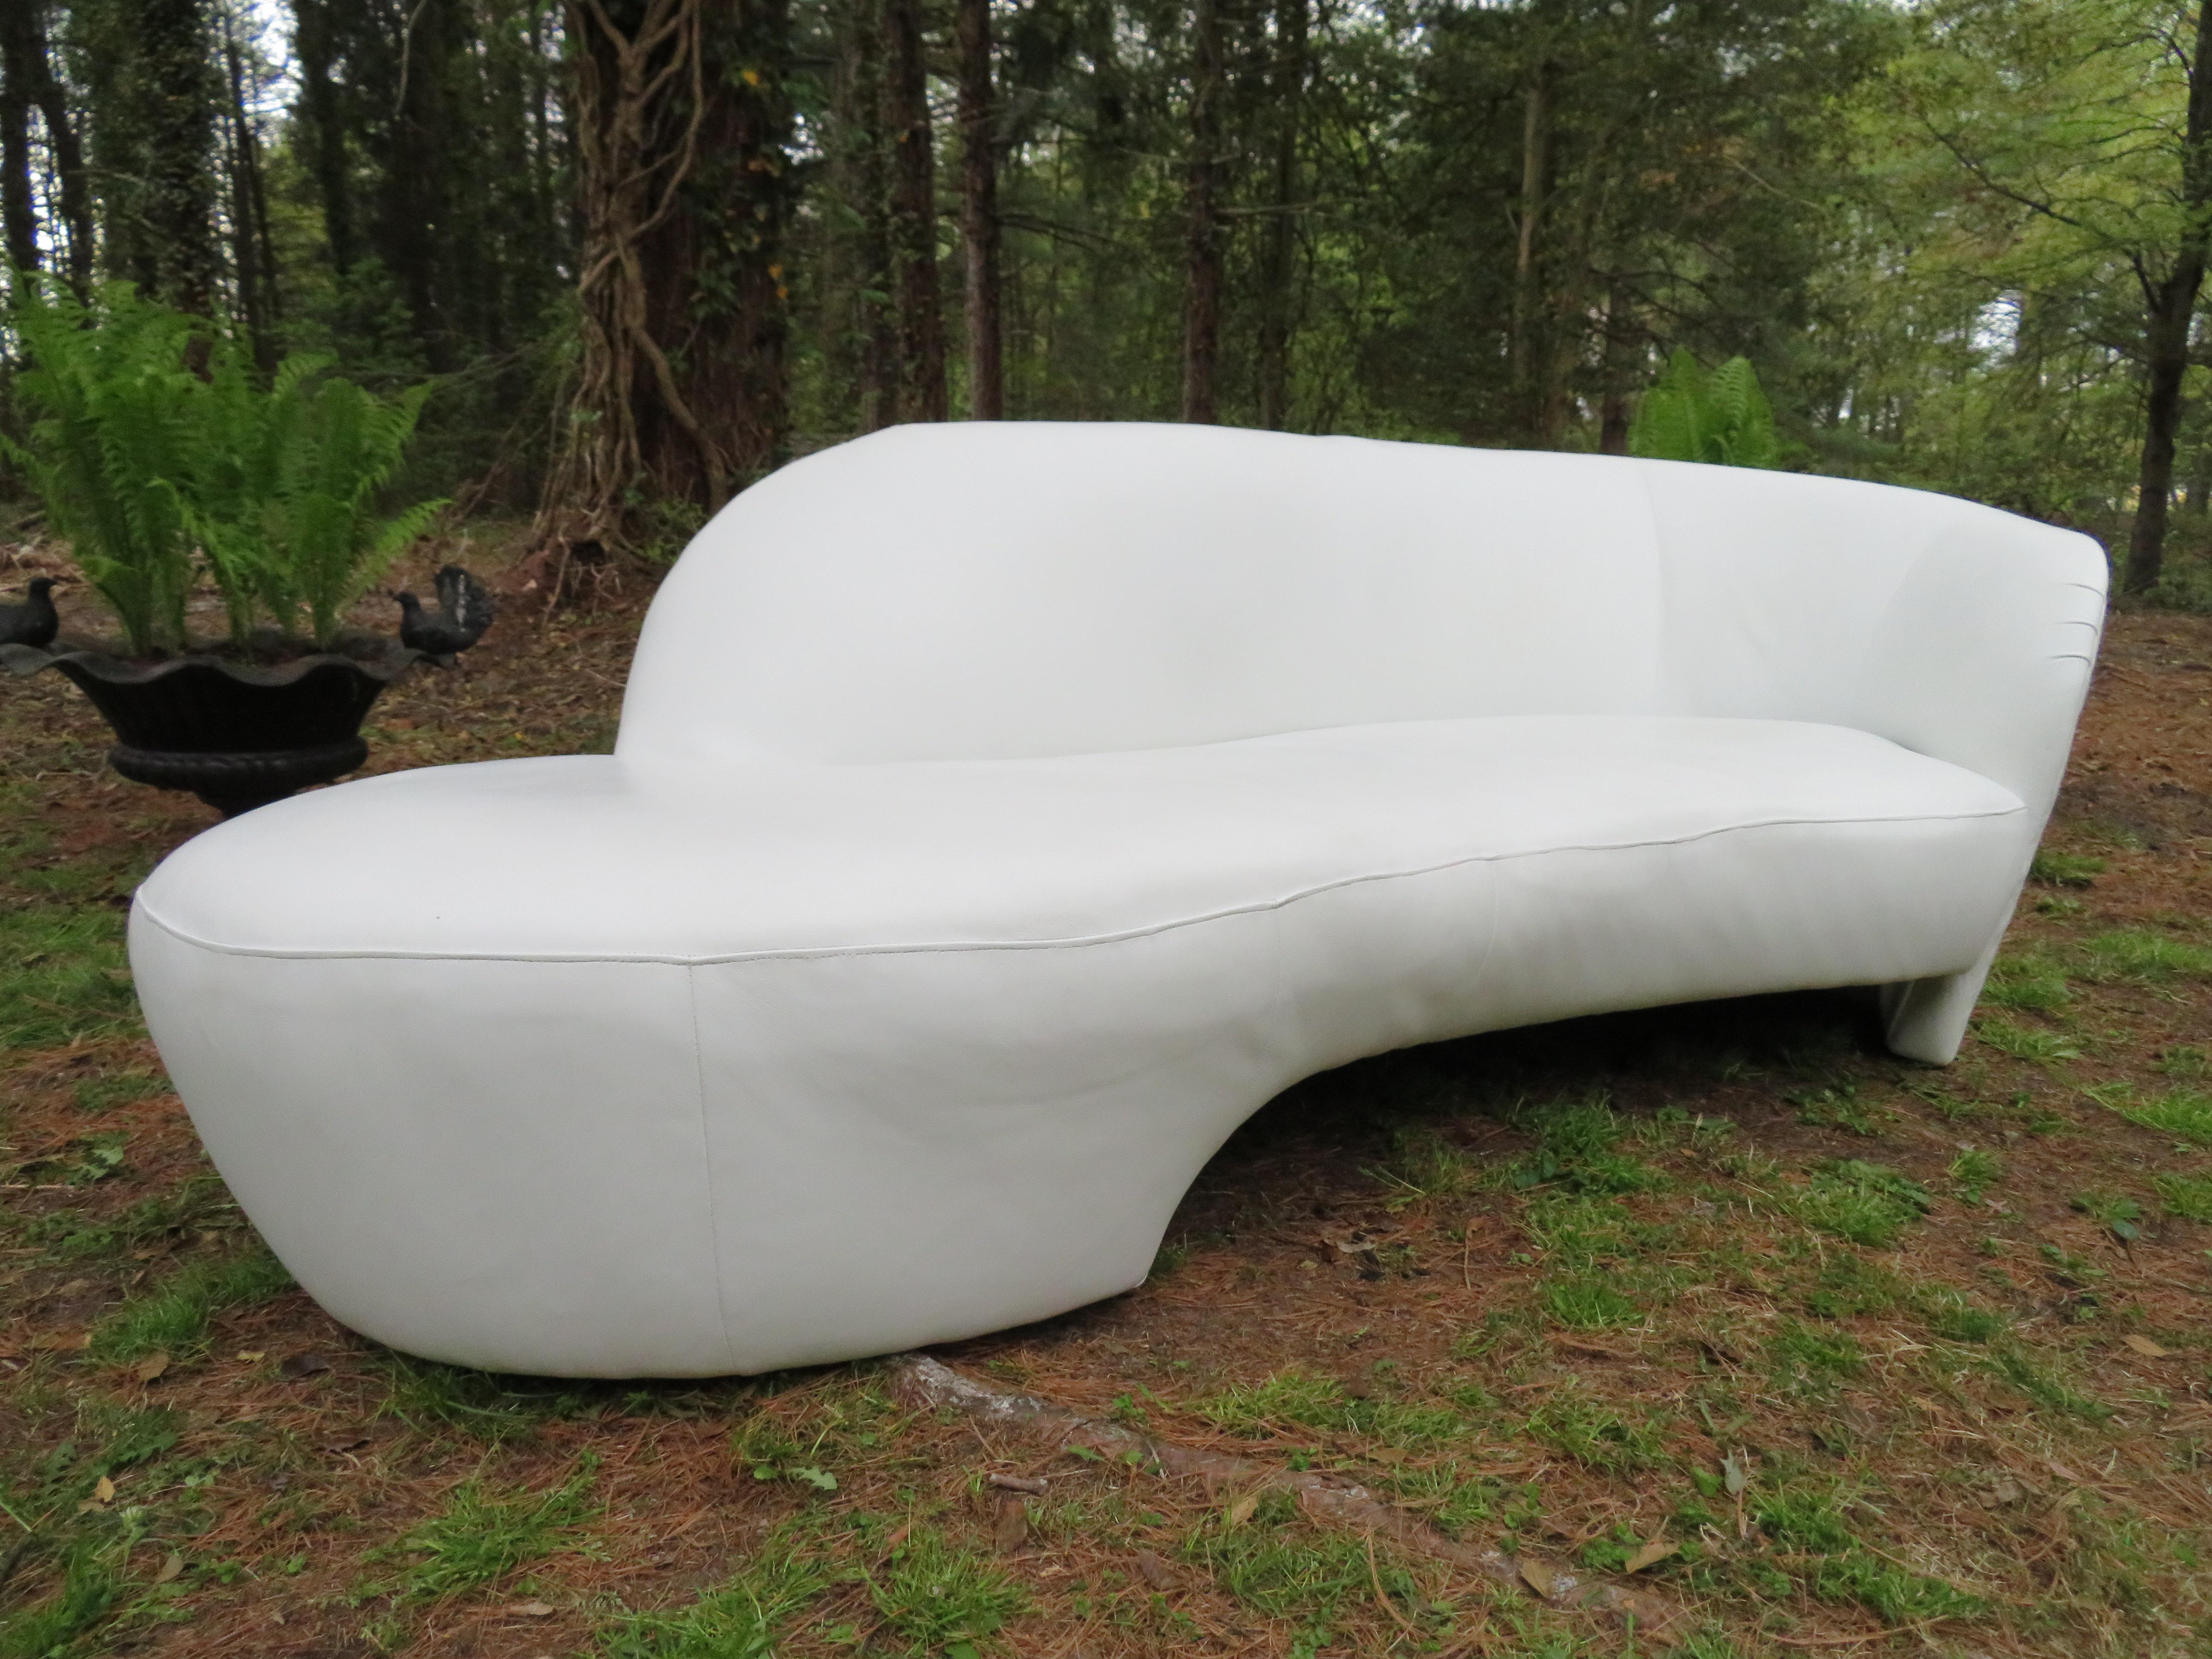 Fabulous Vladimir Kagan attr. white leather cloud sofa, circa 1980s. The original owner had this sofa recently re-upholstered in a durable thick white leather and looks great. 